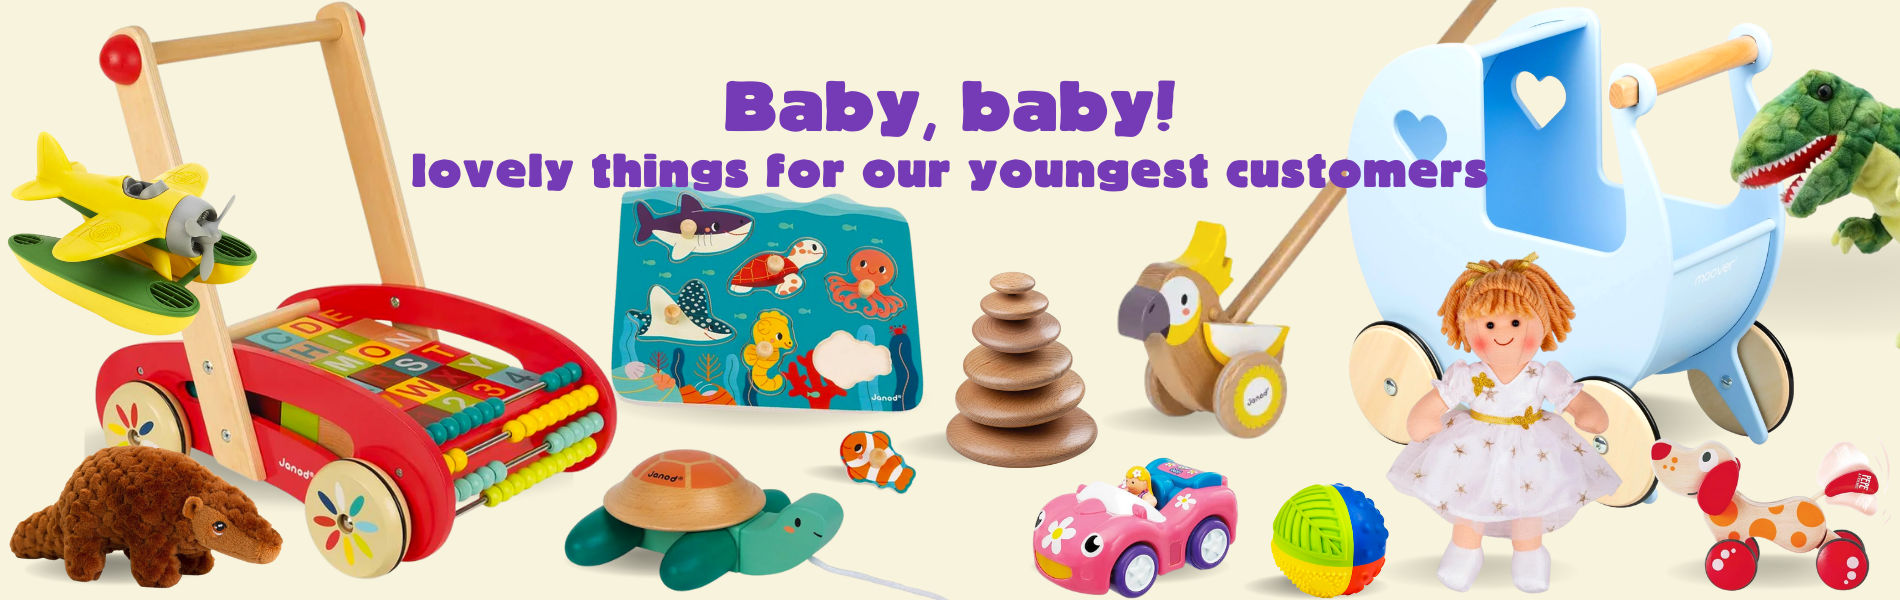 Lots of toys suitable for babies including (from l-r) a red trolley with blocks, a green pull-along turtle, a pink car, a light blue pram and a cuddly green dinosaur.